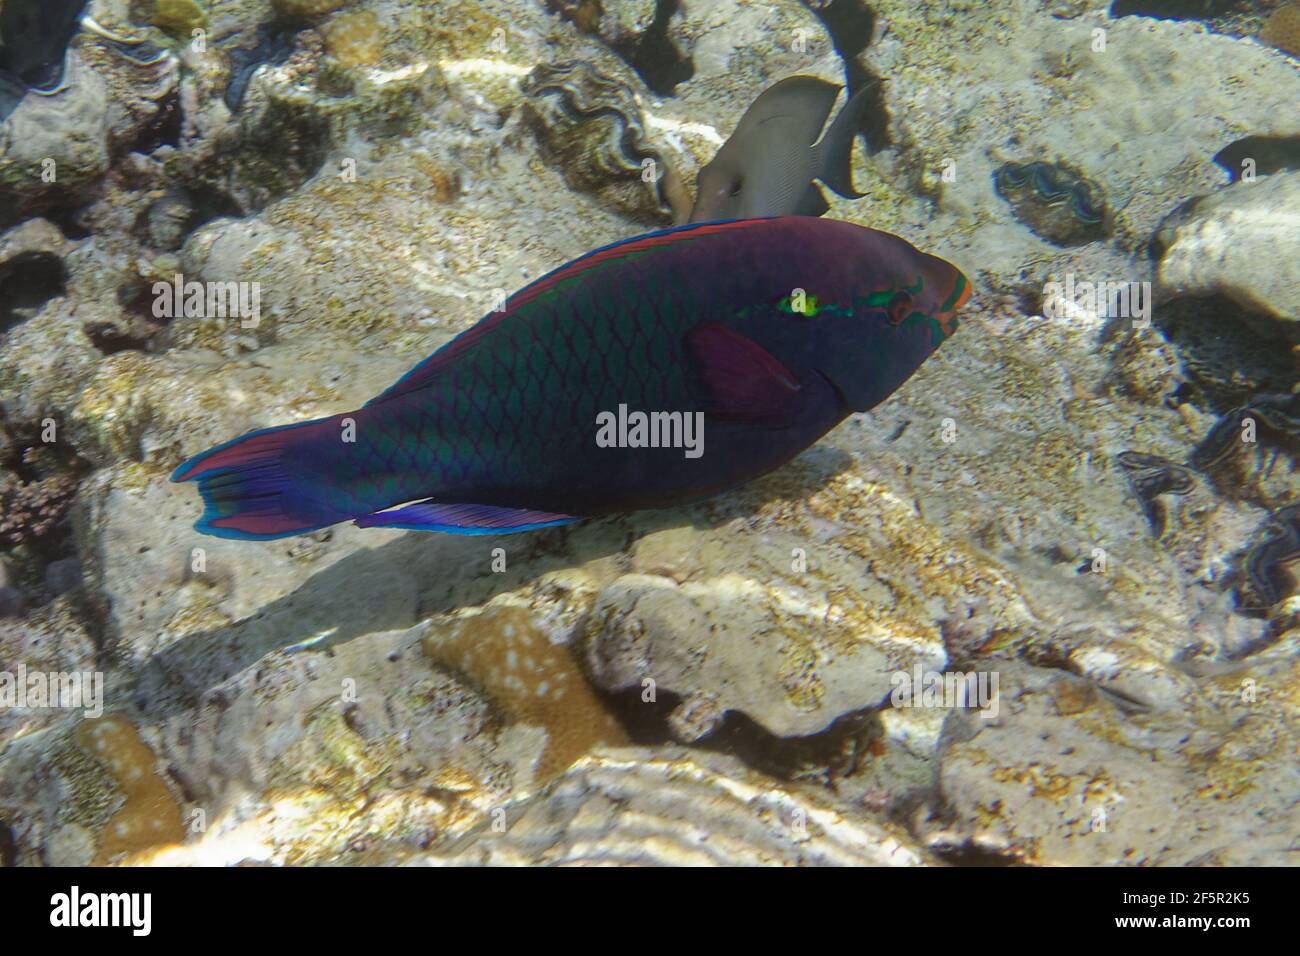 Dusky parrotfish or Swarthy parrotfish (Scarus niger) in Red Sea Stock Photo